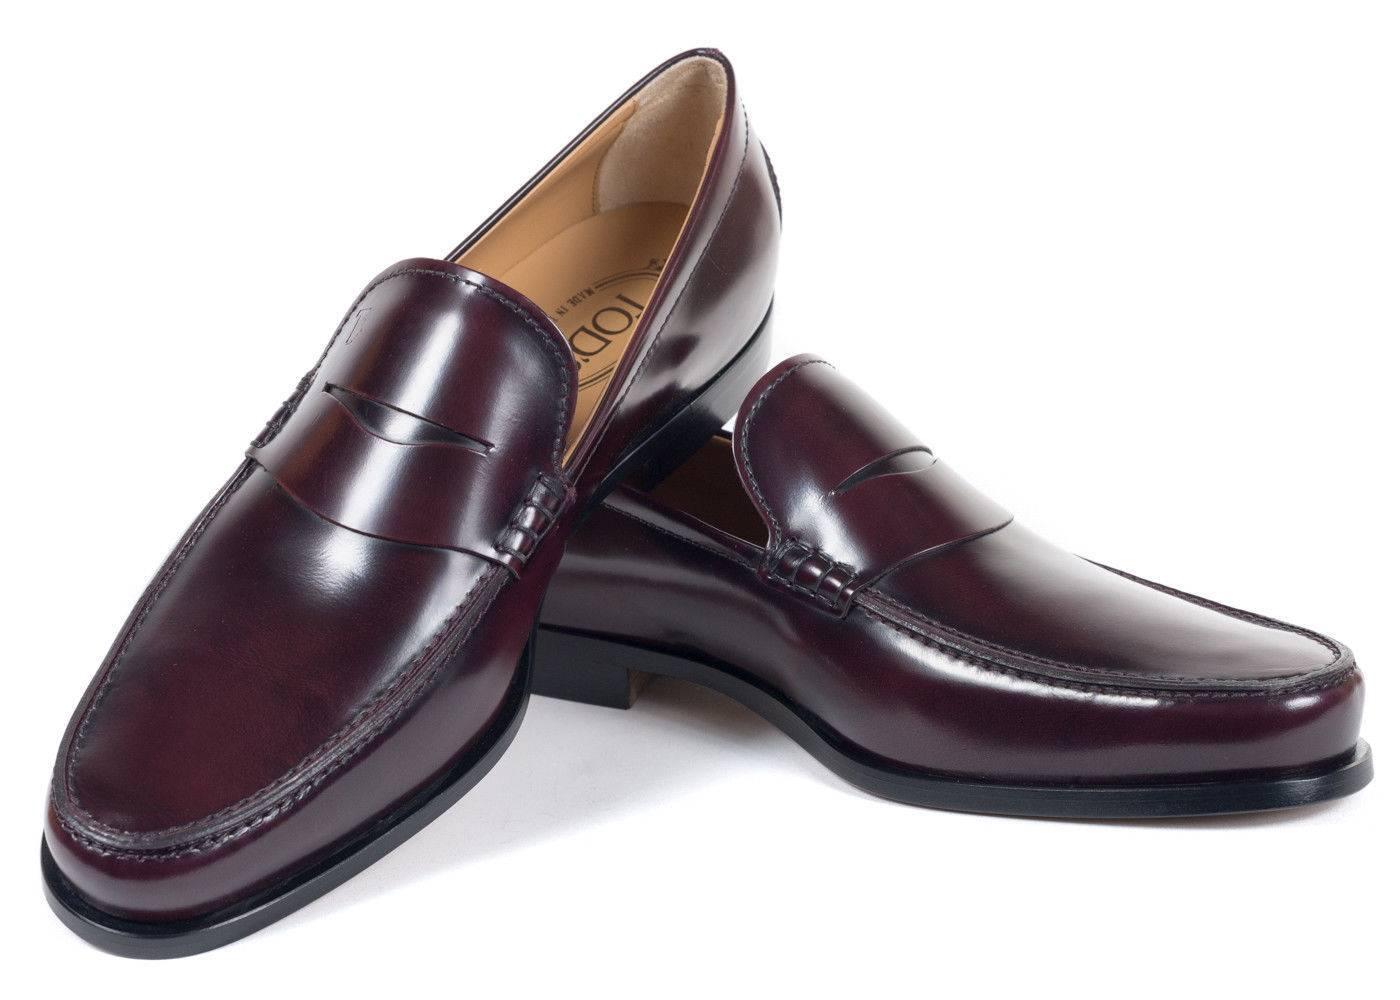 Black Tod's Men's Classic Burgundy Leather Penny Loafers